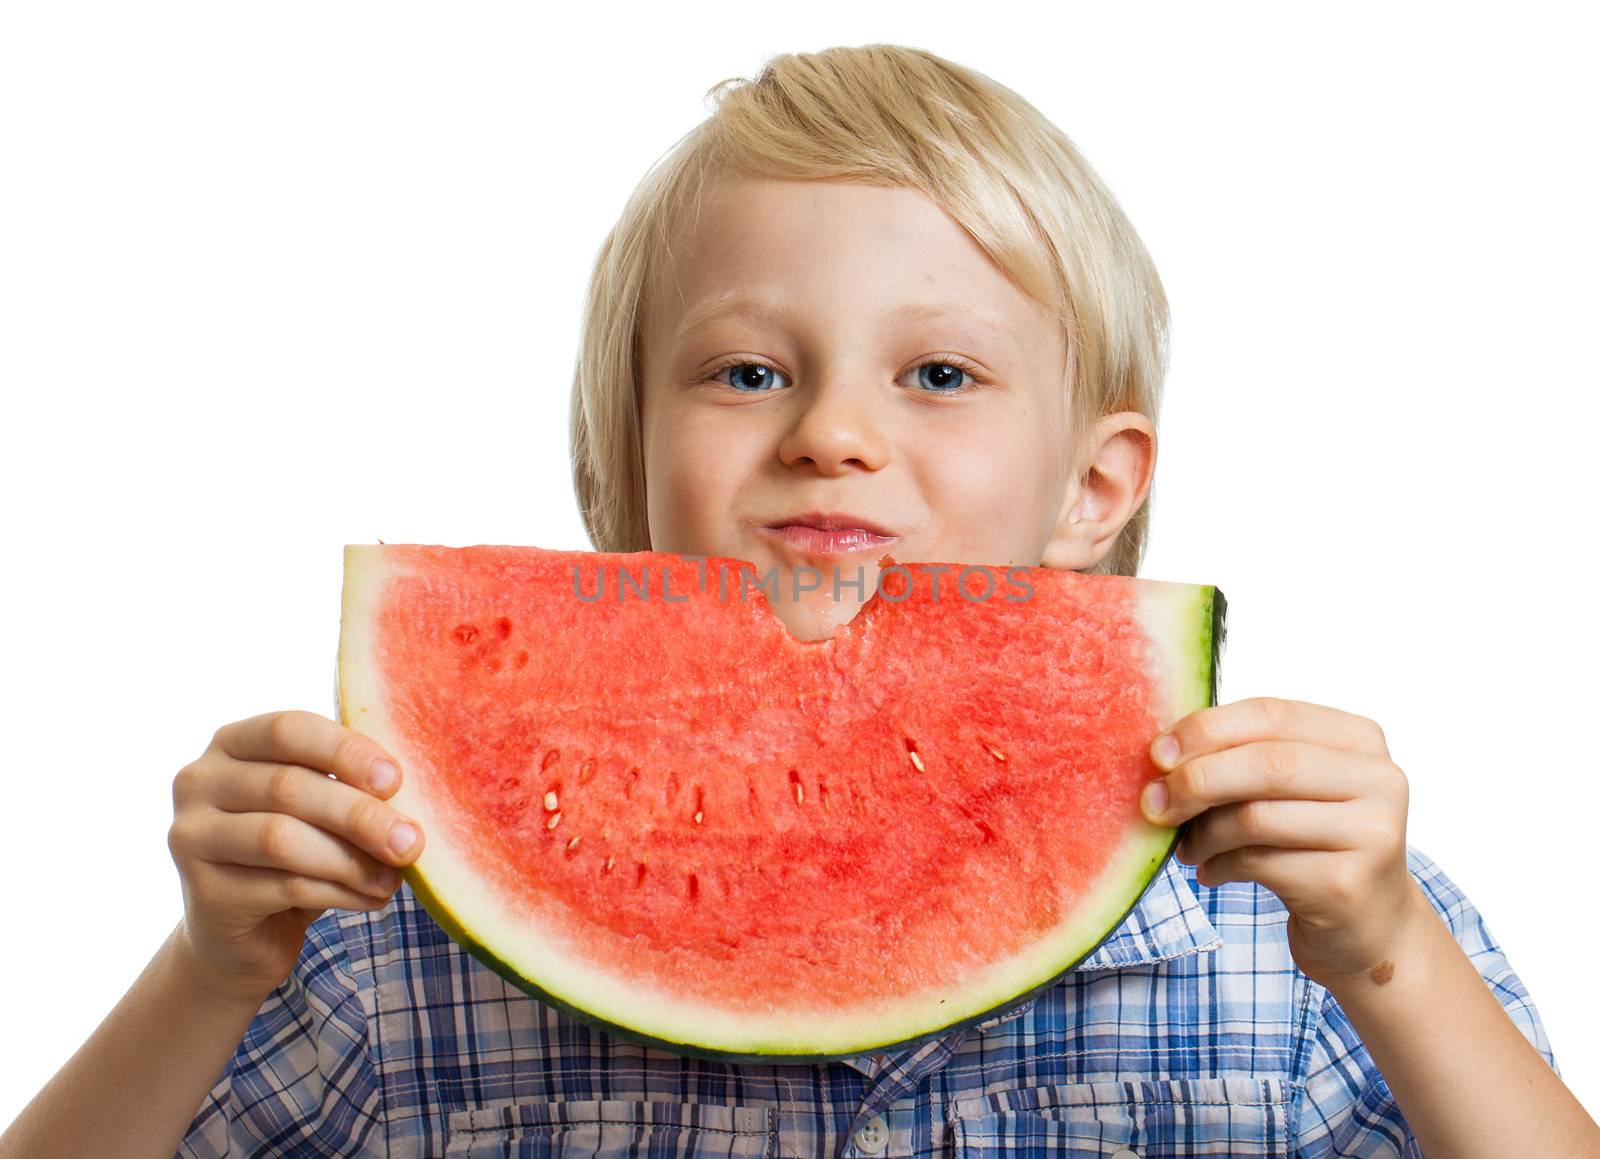 A cute happy smiling boy eating a juicy slice of watermelon. Isolated on white.